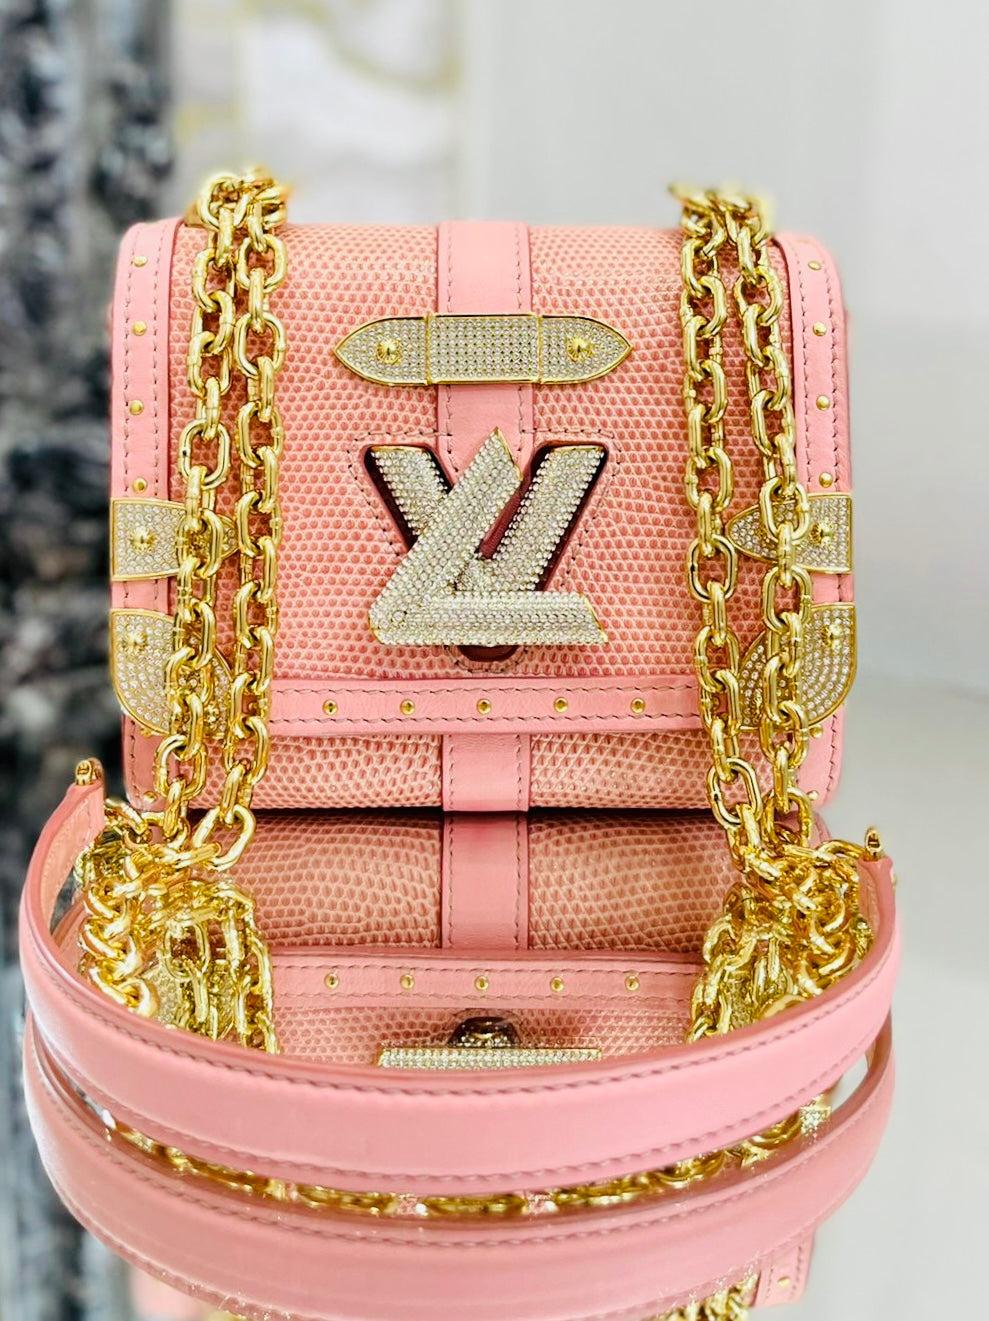 Rare Item - Louis Vuitton Lizard Skin & Crystal Trunk/Twist Lock Bag

Very rare ltd edition bag. Crossbody trunk style bag in pink exotic skin with gold hardware. Twist lock 

closure and other hardware to the front having crystals set through